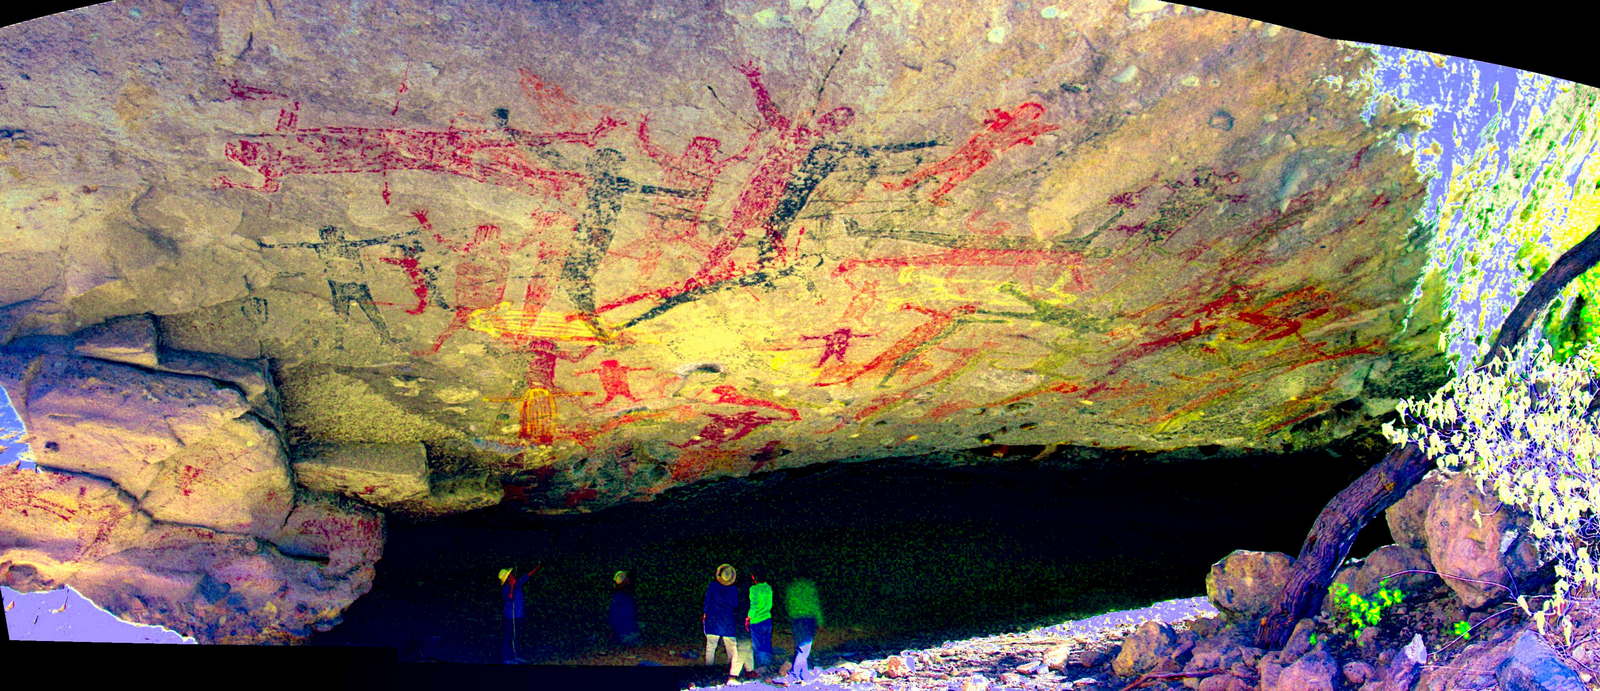 As I study the rock art I see patterns in painting details and in relationships among the figures. I will mention what I see in the images, but mainly this slideshow showcases the incredible paintings. (LDS)